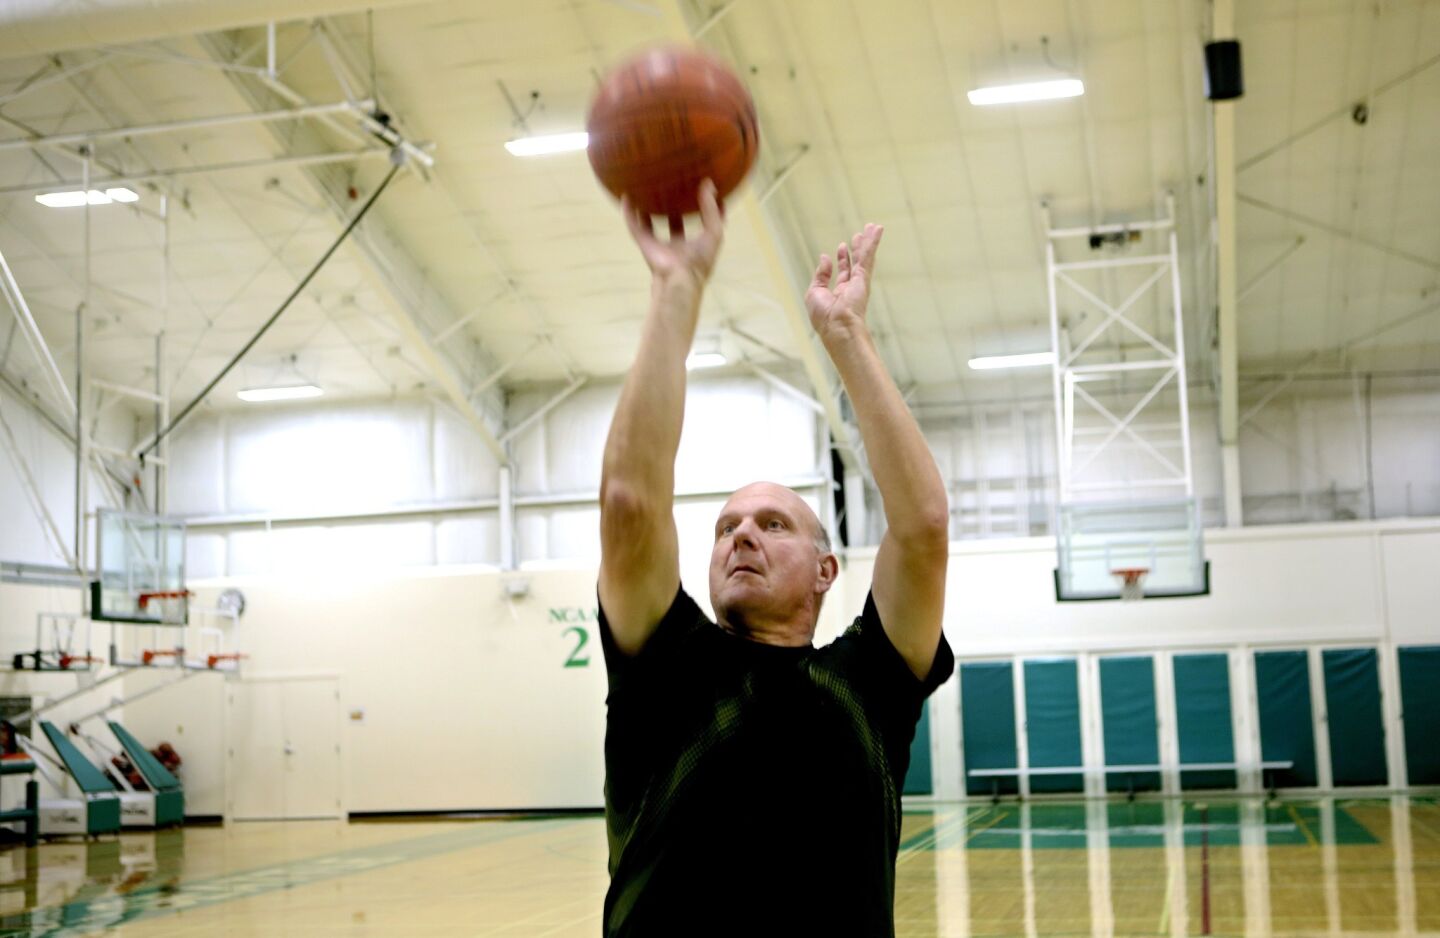 Clippers owner Steve Ballmer shoots free throws during his workout at Pro Sports Club in Bellevue, Wash.